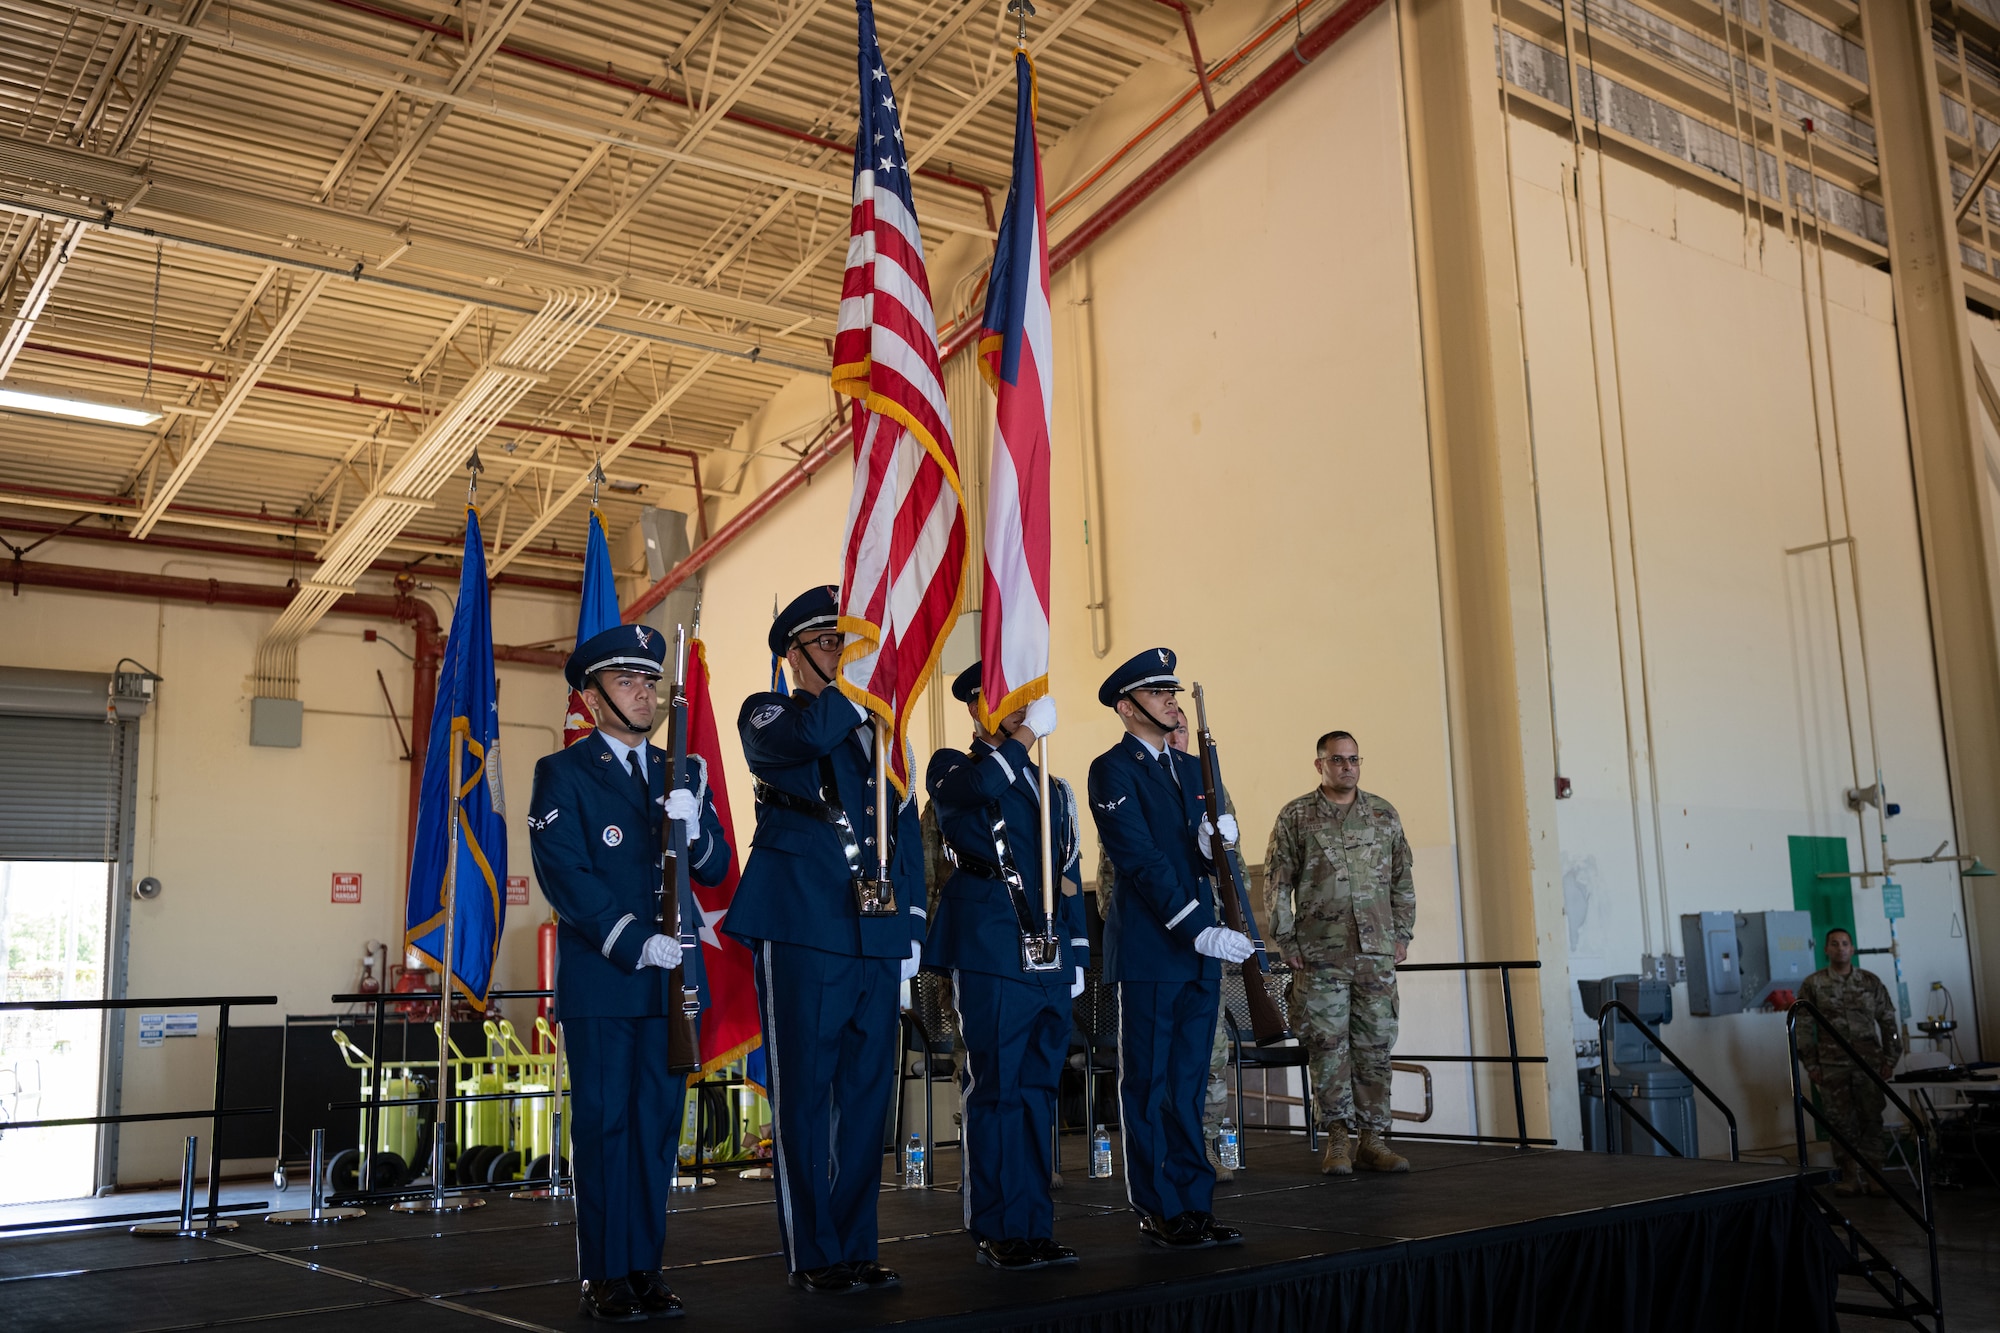 U.S. Airmen with the 156th Wing Honor Guard, present the colors during the 156th Wing change of command ceremony at Muñiz Air National Guard Base, Carolina, Puerto Rico, Oct. 15, 2022. The change of command ceremony took place during the October regularly scheduled drill. (U.S. Air National Guard photo by Staff Sgt. Eliezer Soto)